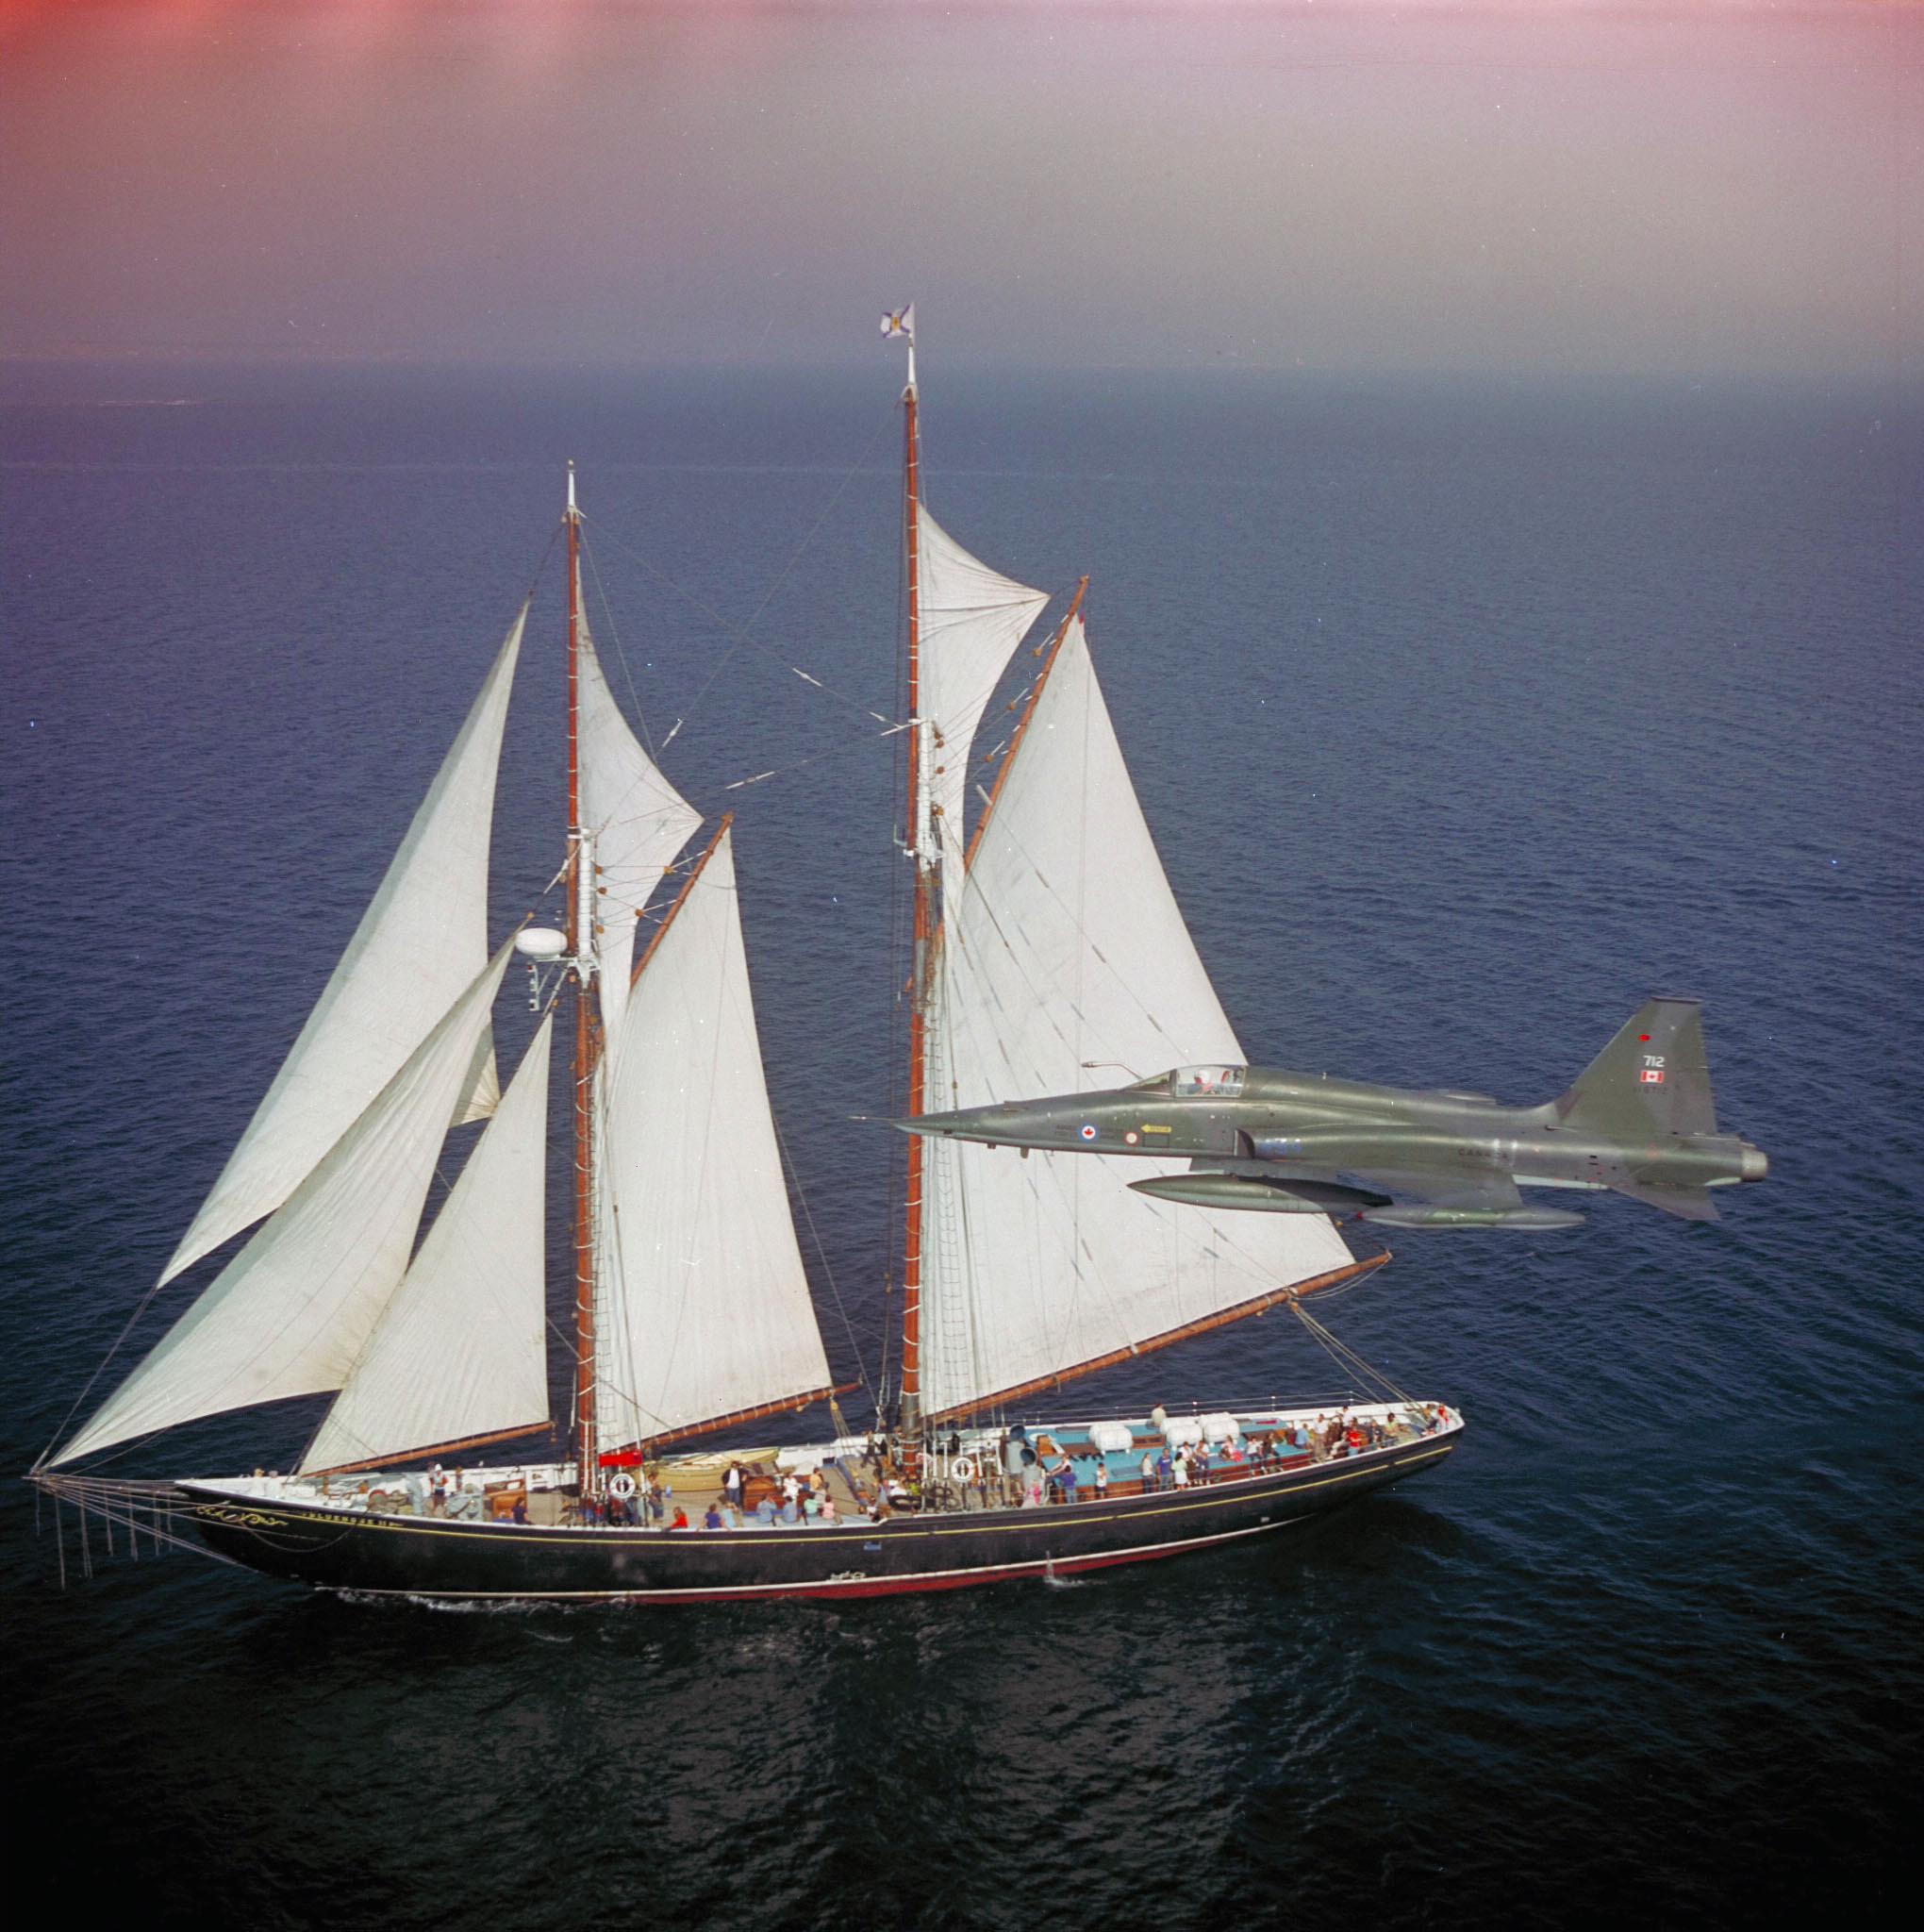 An F-5 aircraft (officially designated as the CF-116 Freedom Fighter) from 434 “Bluenose” Squadron flies over the Bluenose II in a circa 1975 photo. DND Photo